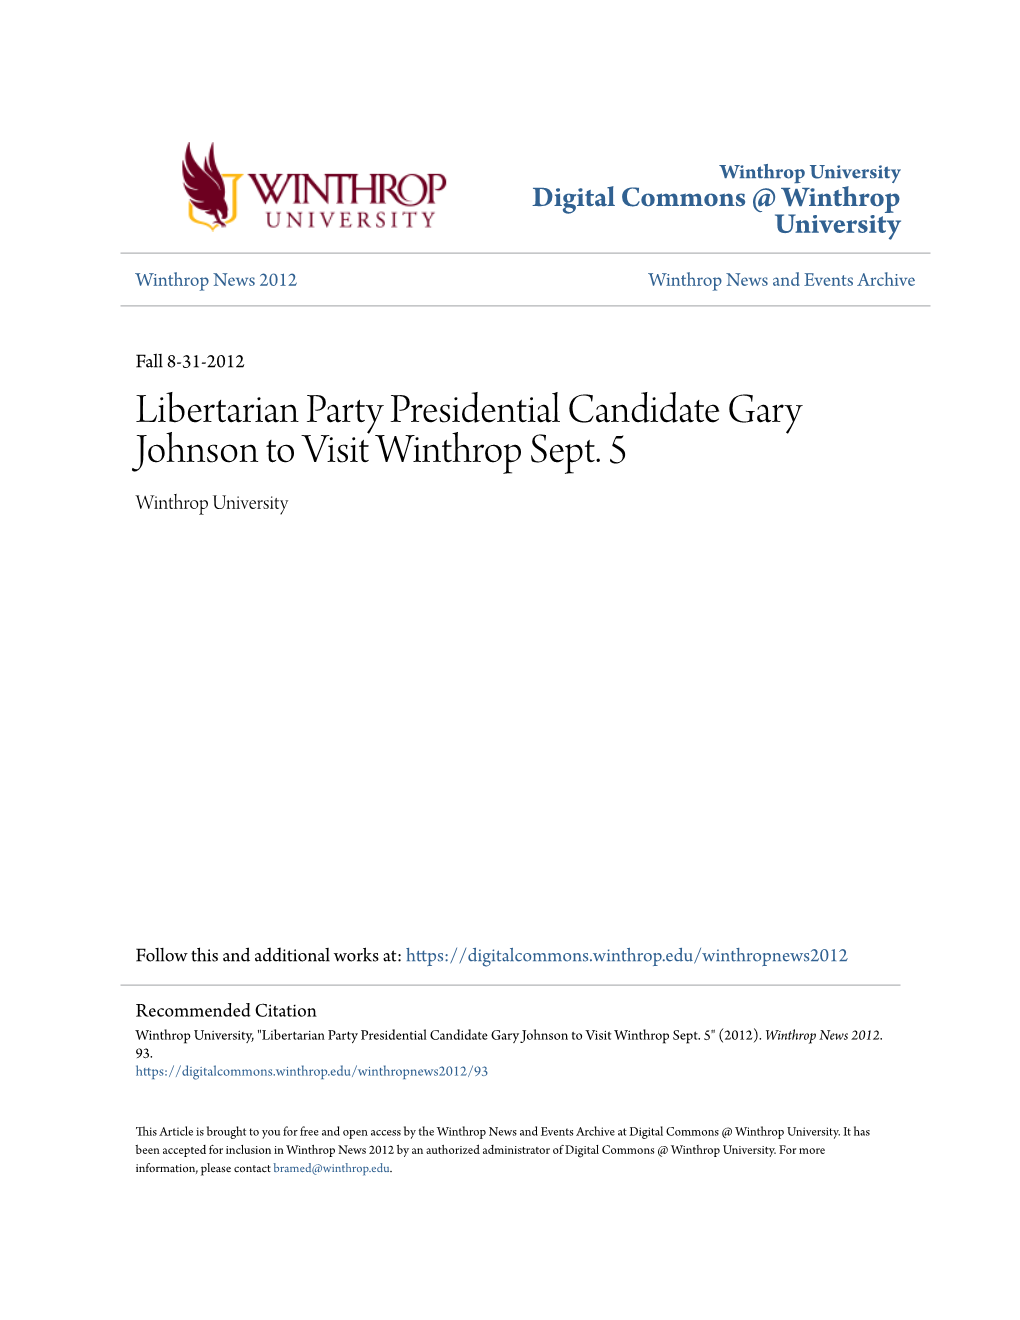 Libertarian Party Presidential Candidate Gary Johnson to Visit Winthrop Sept